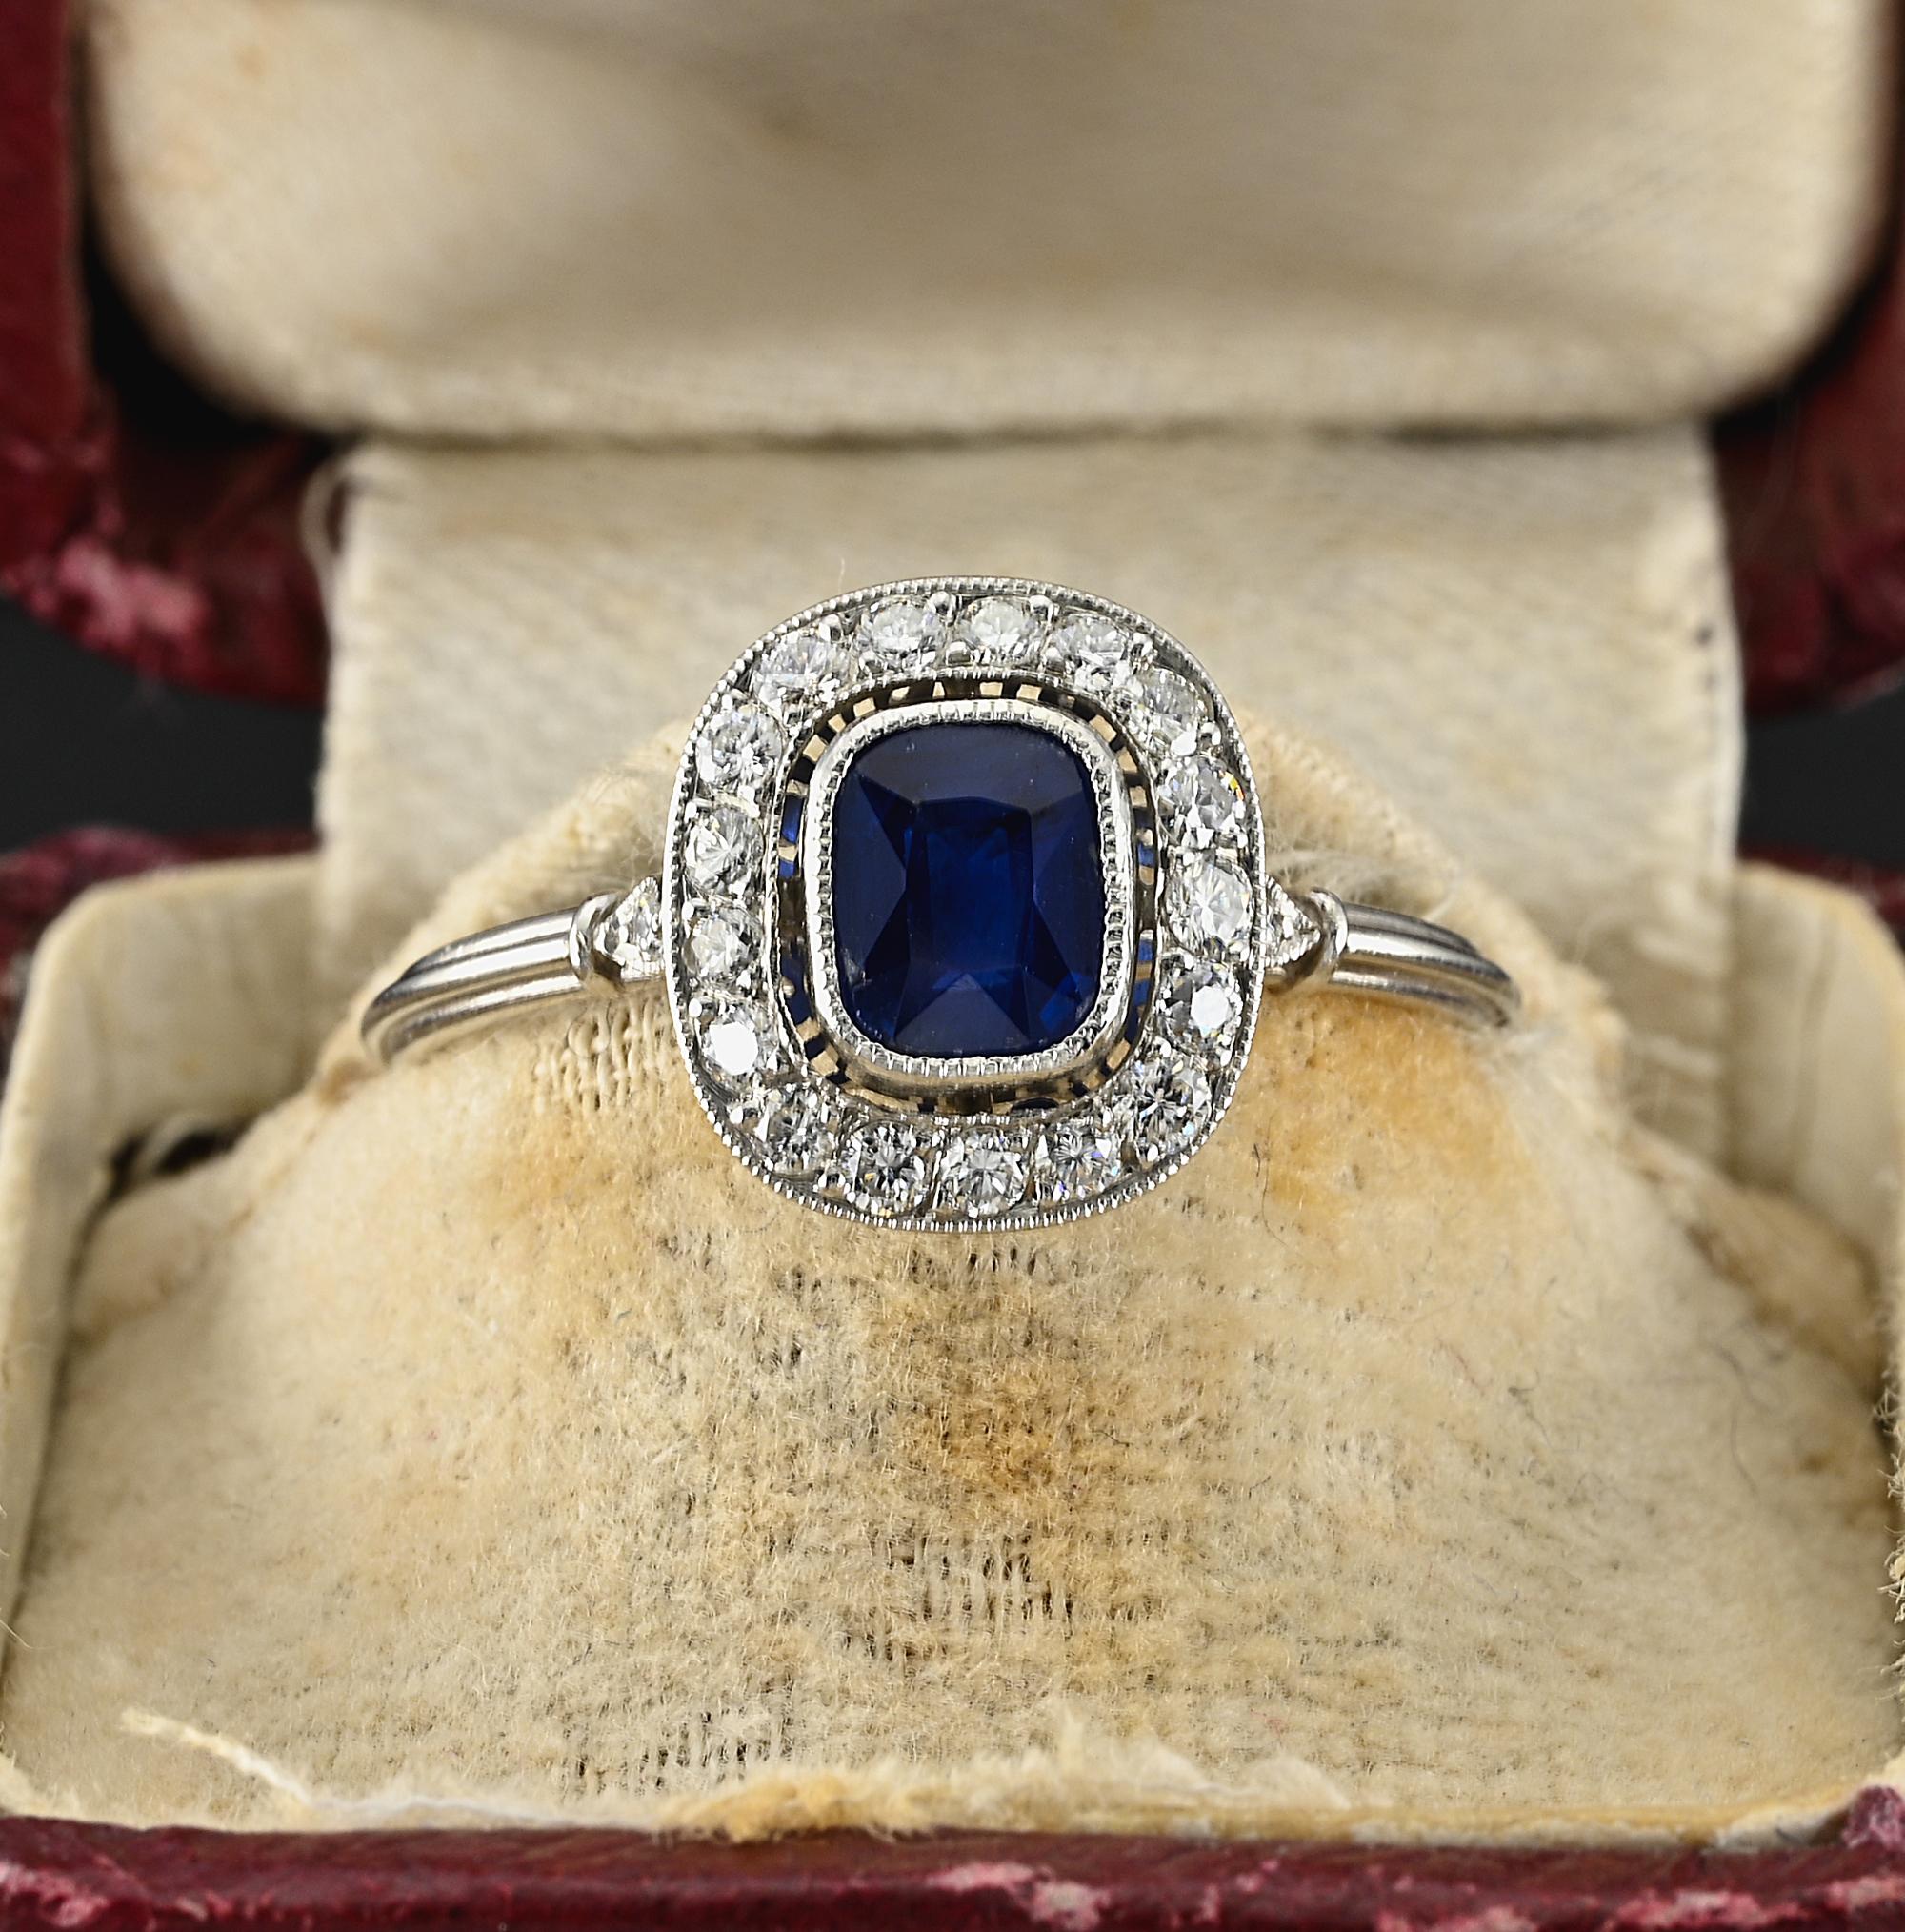 Charming Art Deco Style Platinum marked exquisite halo design is the epitome of eternal elegance
Centrally set with a vibrant velvety Blue hue oval cushion cut natural Sapphire estimate  .77 Ct. (5.9 x 4.9 mm.) weight of the Sapphire is stamped into